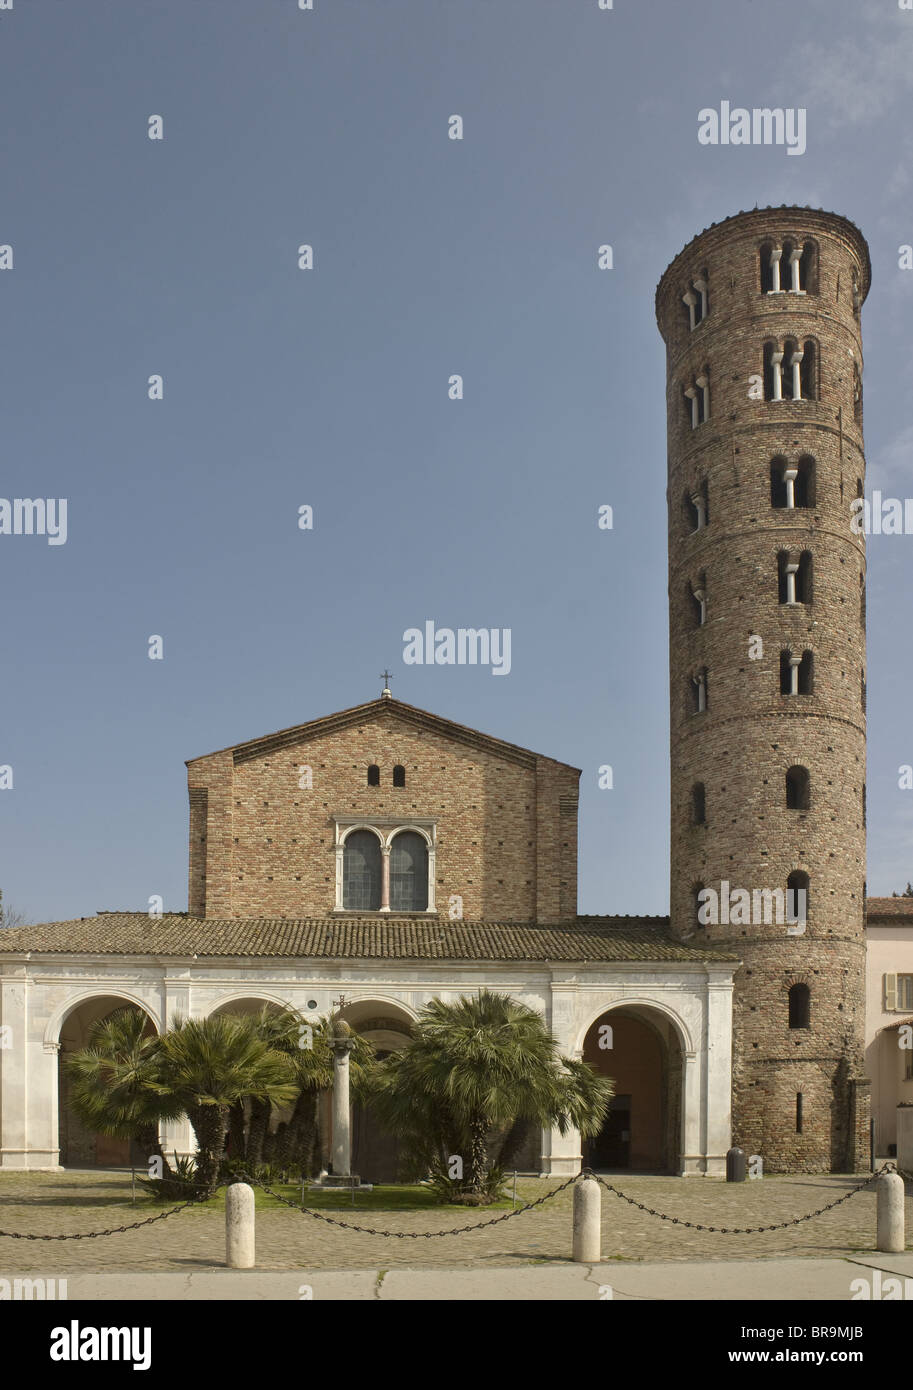 Italy Ravenna Basilica of Sant' Apollinare Nuovo built by Theodoric in the 6th century Exterior with campanile. Stock Photo